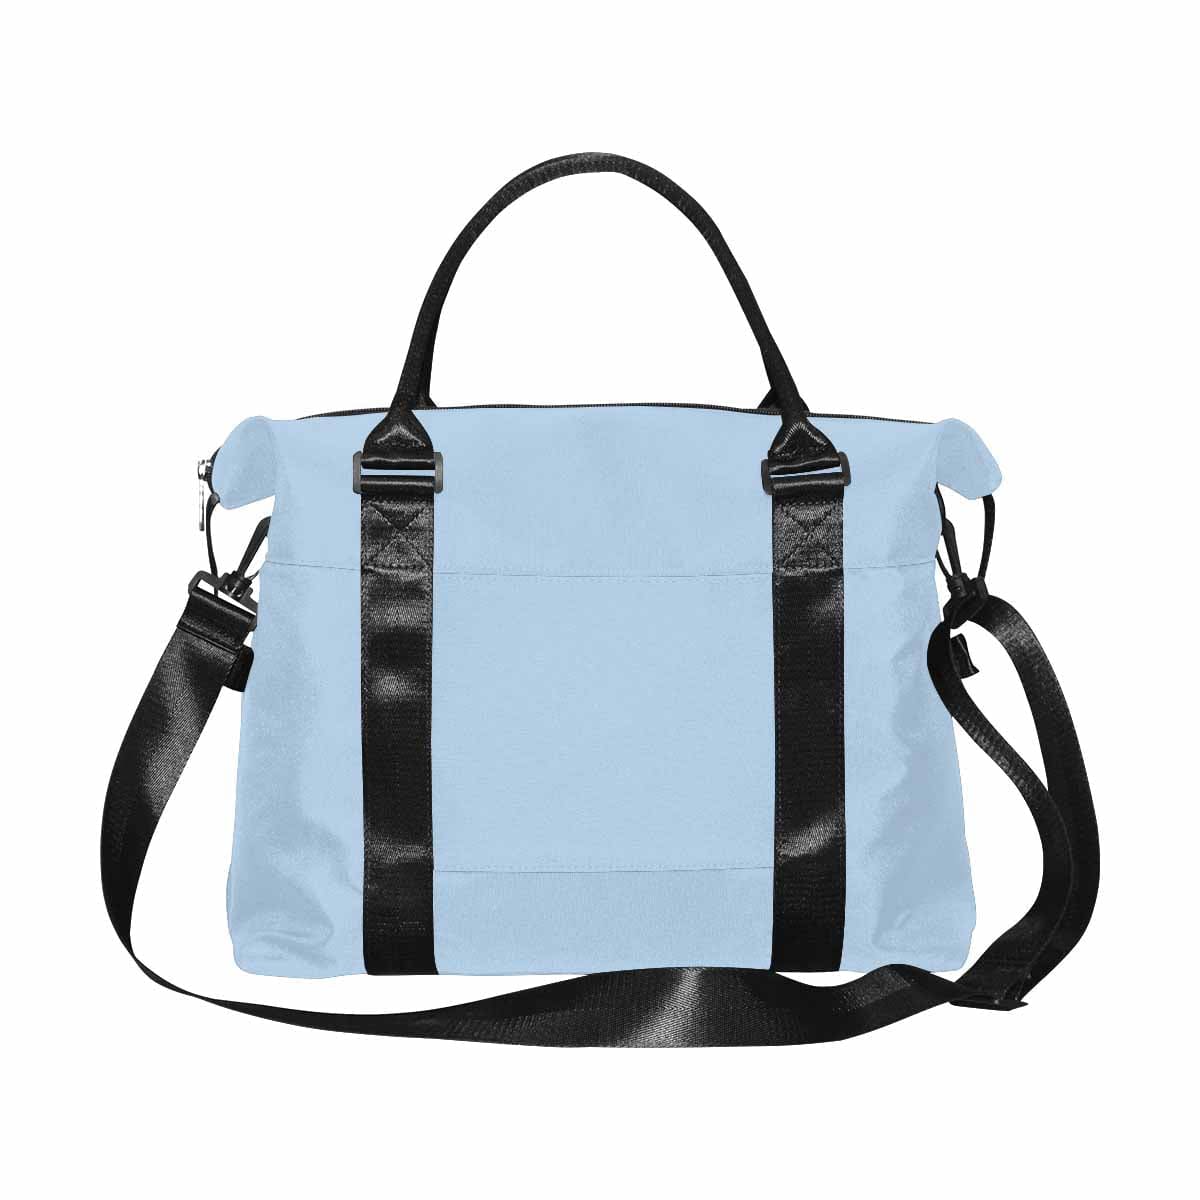 Travel Bag Serenity Blue Canvas Carry On - Bags | Travel Bags | Canvas Carry